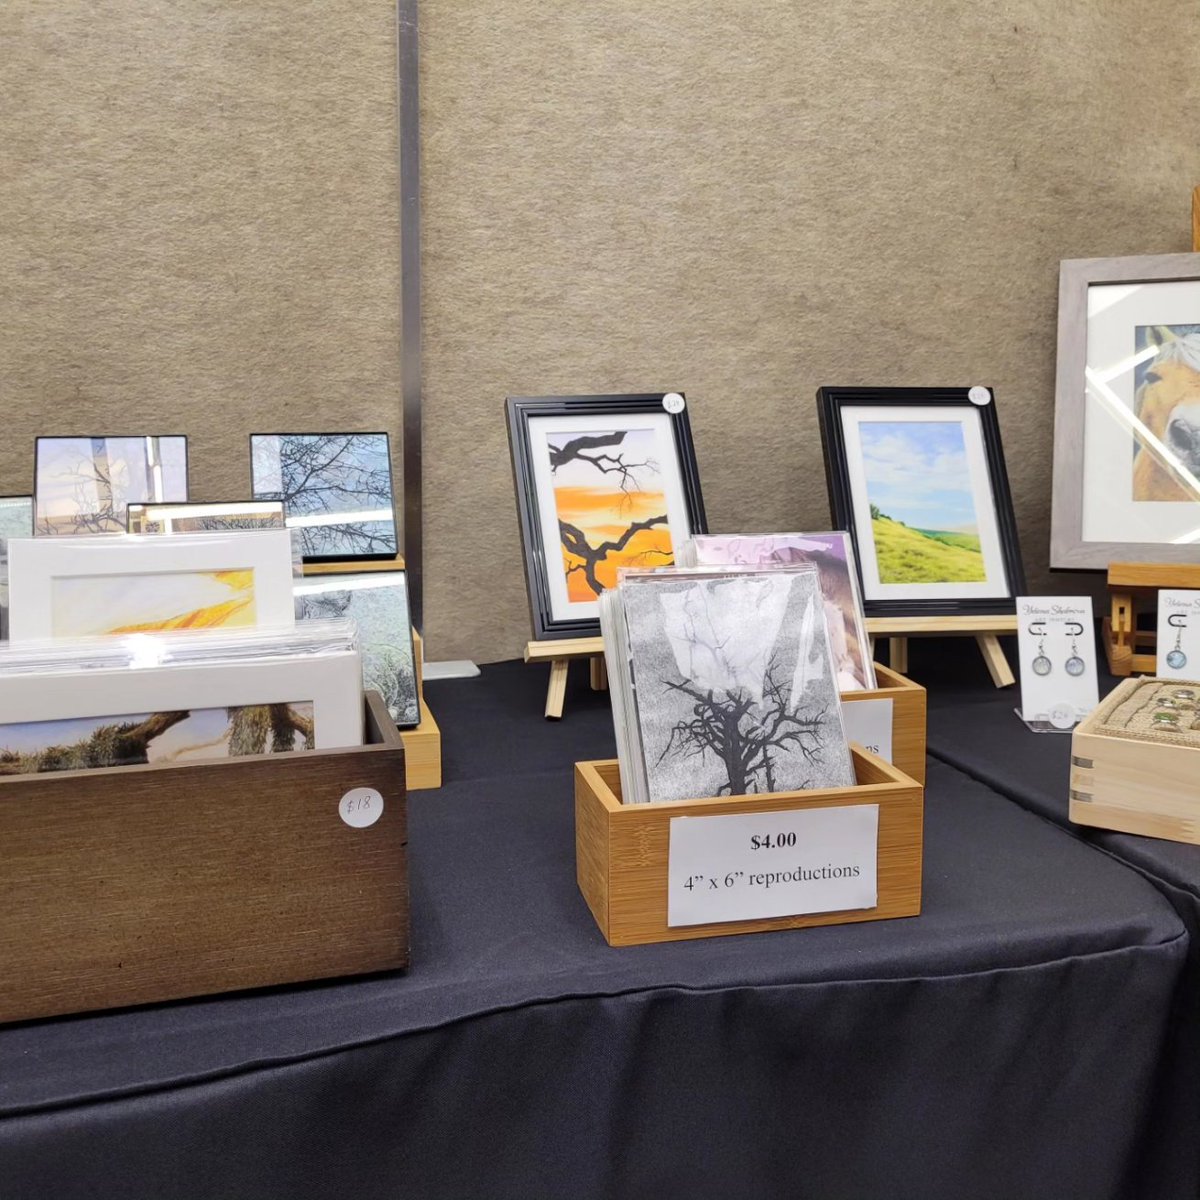 I'm at the Spring Fling Art Festival today and tomorrow, 10-4. Come to the Pioneer Community Center in Oregon City to see some great art and talk to our talented artists!

#artfestival #artshow #oregonartists #pnwartists #pnw #oregoncity #oregonartscene #shoplocal #artgifts